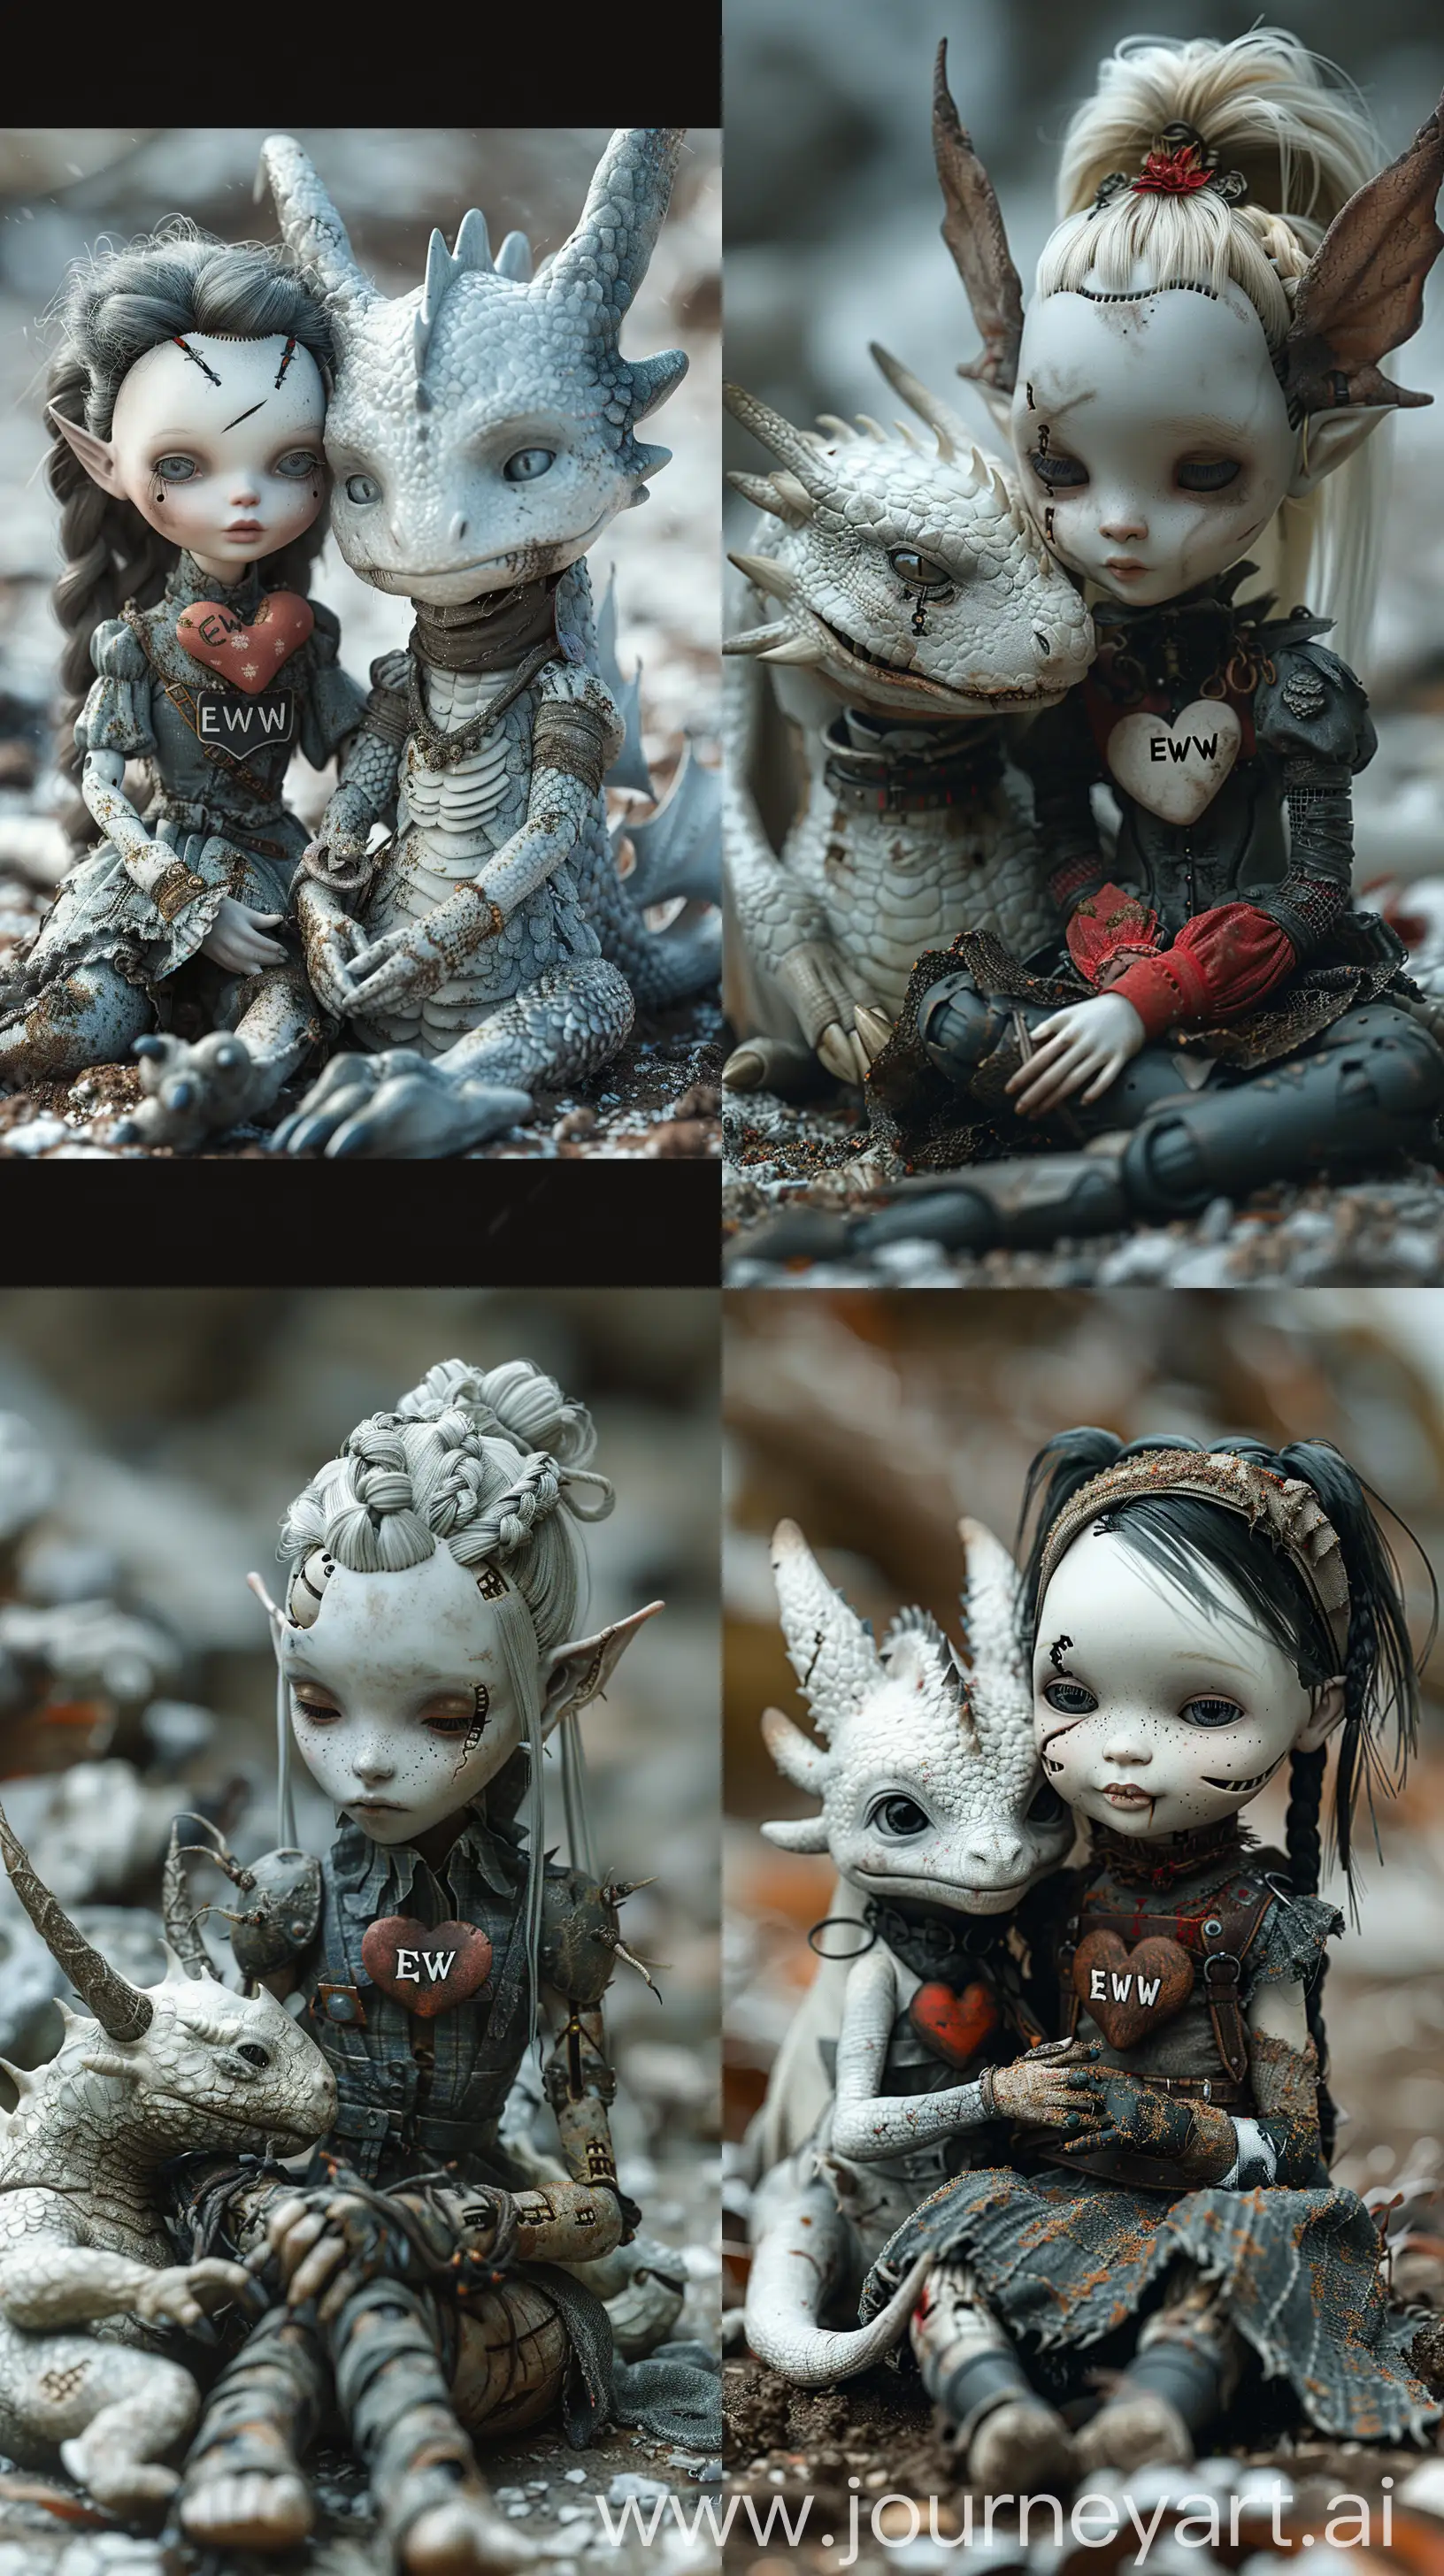 Tim-BurtonStyle-Doll-with-Heart-and-White-Dragon-in-UltraRealistic-Surreal-Setting